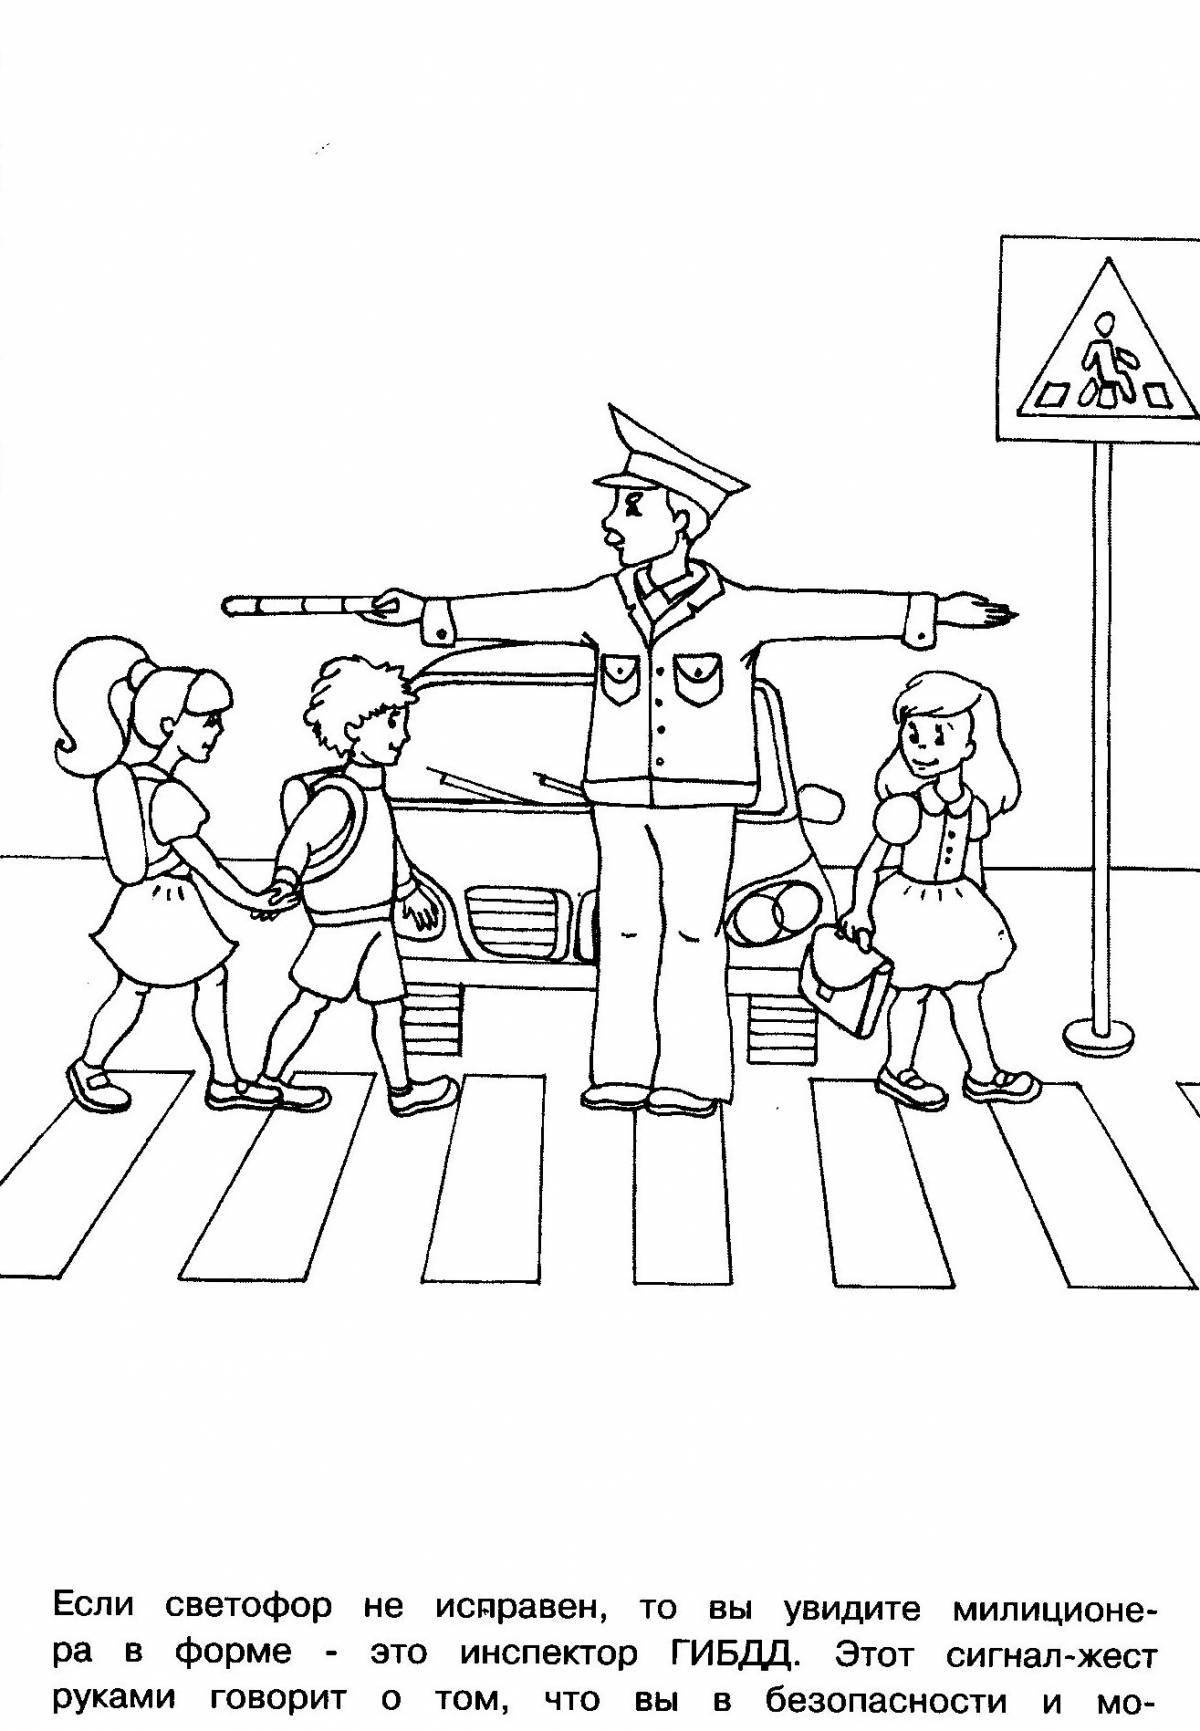 Funny traffic rules coloring book for kindergarten